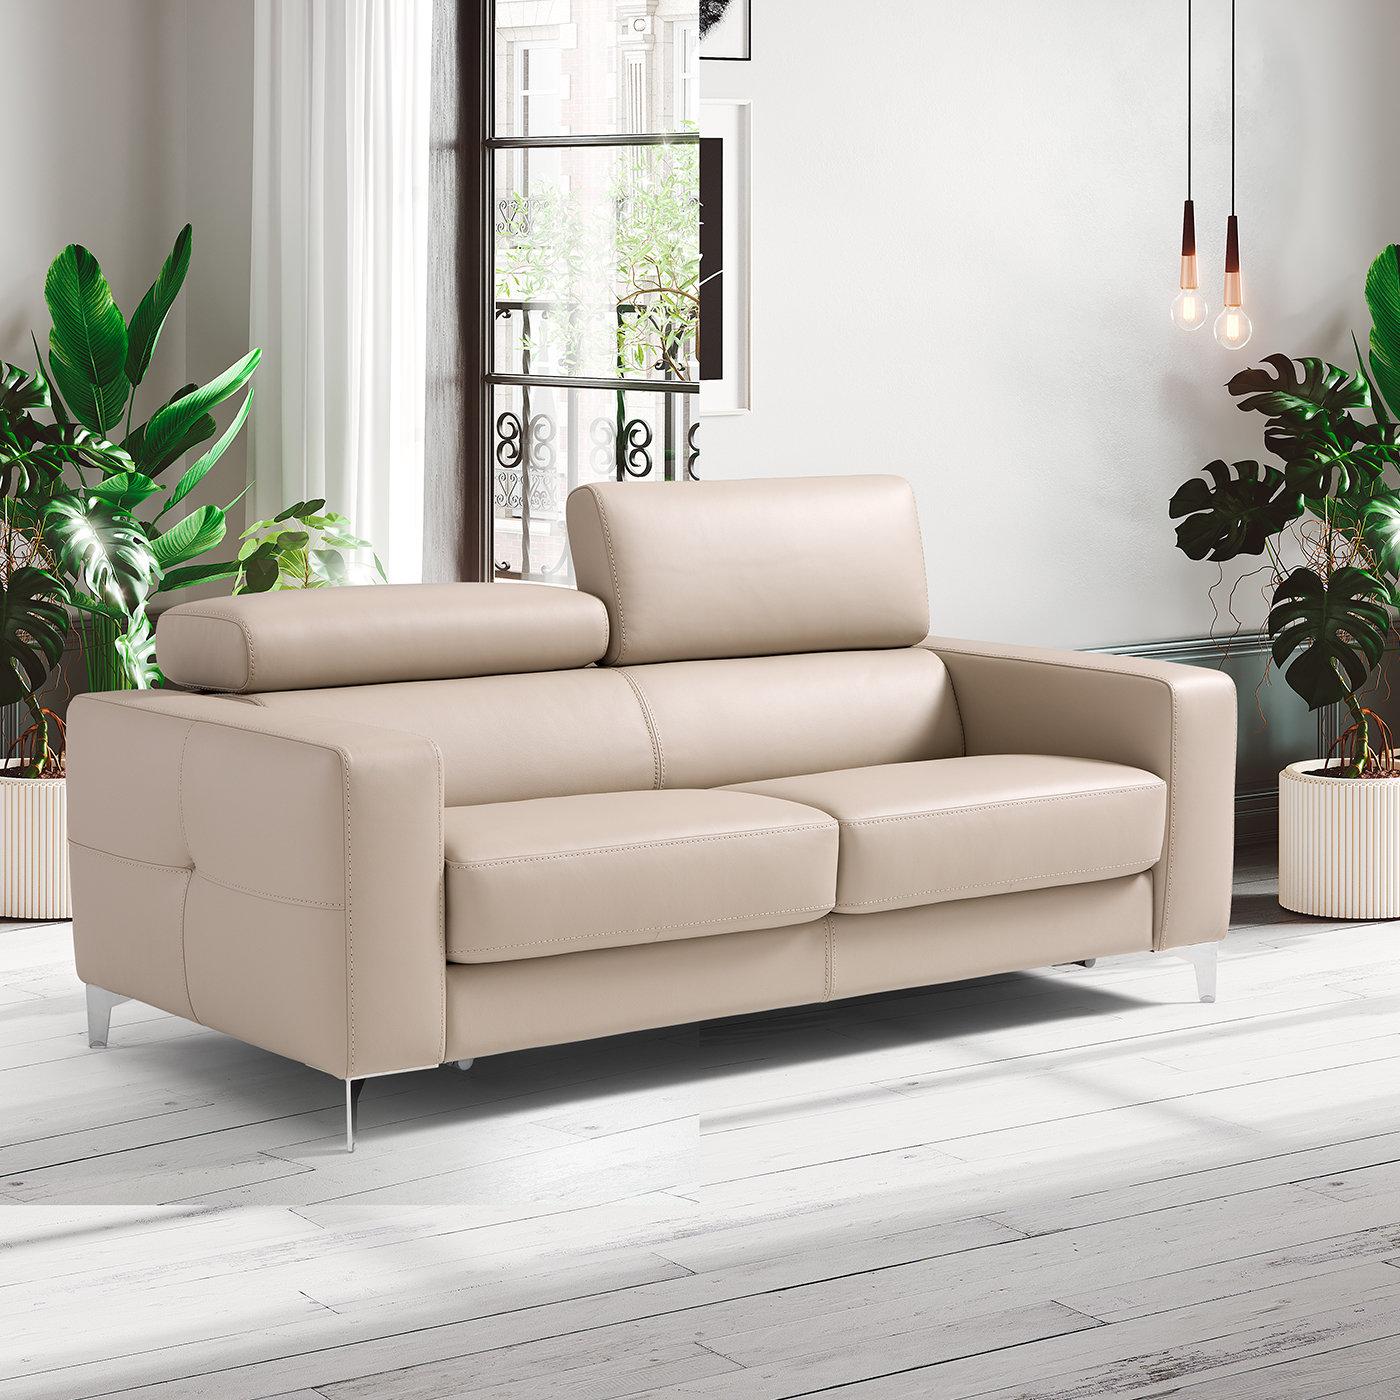 Raised on luminous and compact metal feet, this sofa bed is the epitome of modern style and impeccable comfort. Subtle quilted details add aesthetic appeal to the smooth, beige-toned leather upholstery, which increases the comfort provided by the